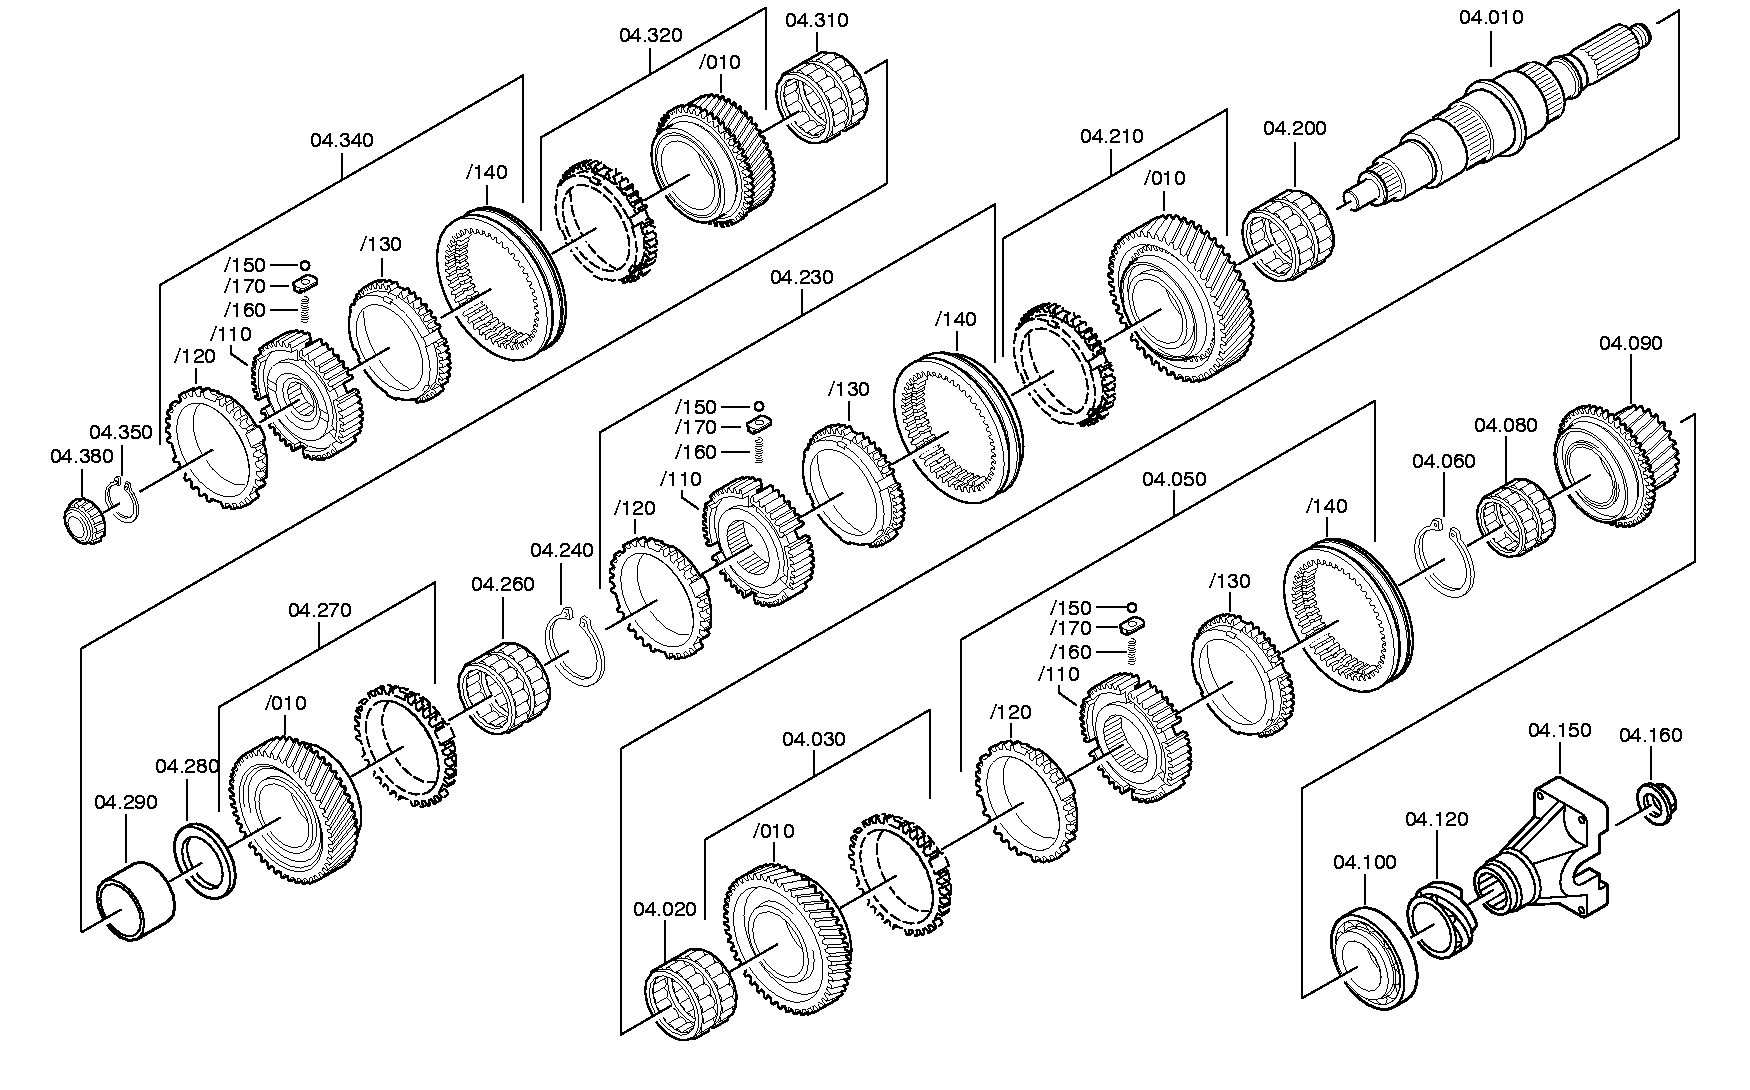 drawing for NISSAN MOTOR CO. 07903027-0 - HELICAL GEAR (figure 1)